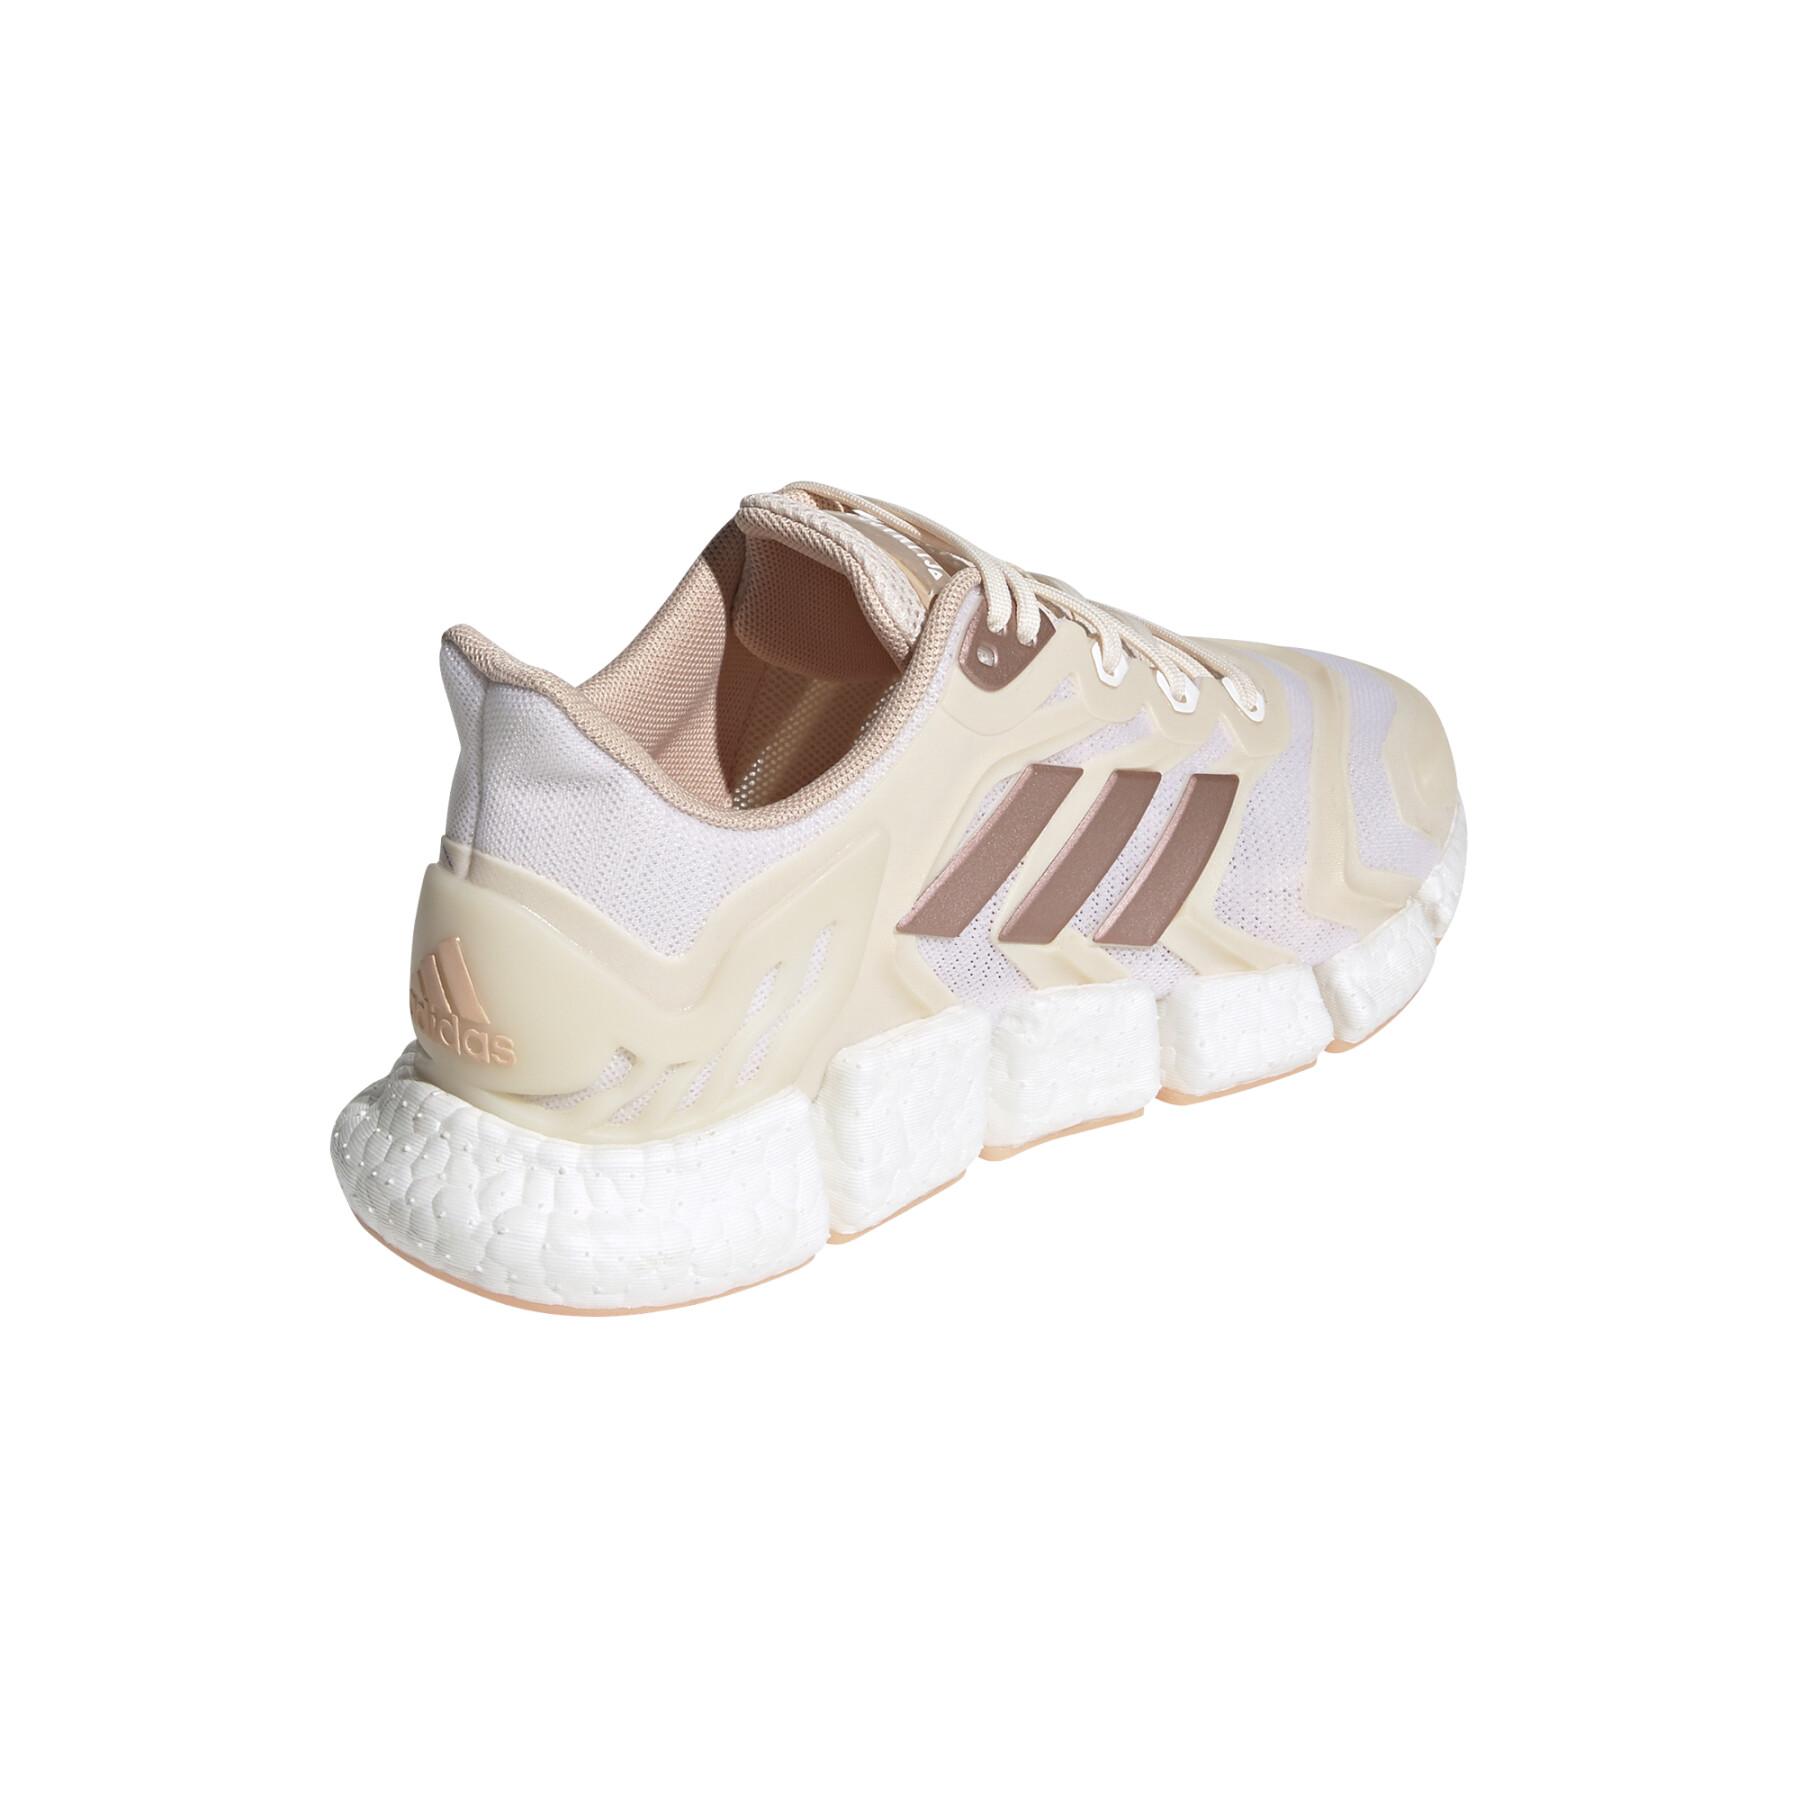 Women's shoes adidas Climacool Vento